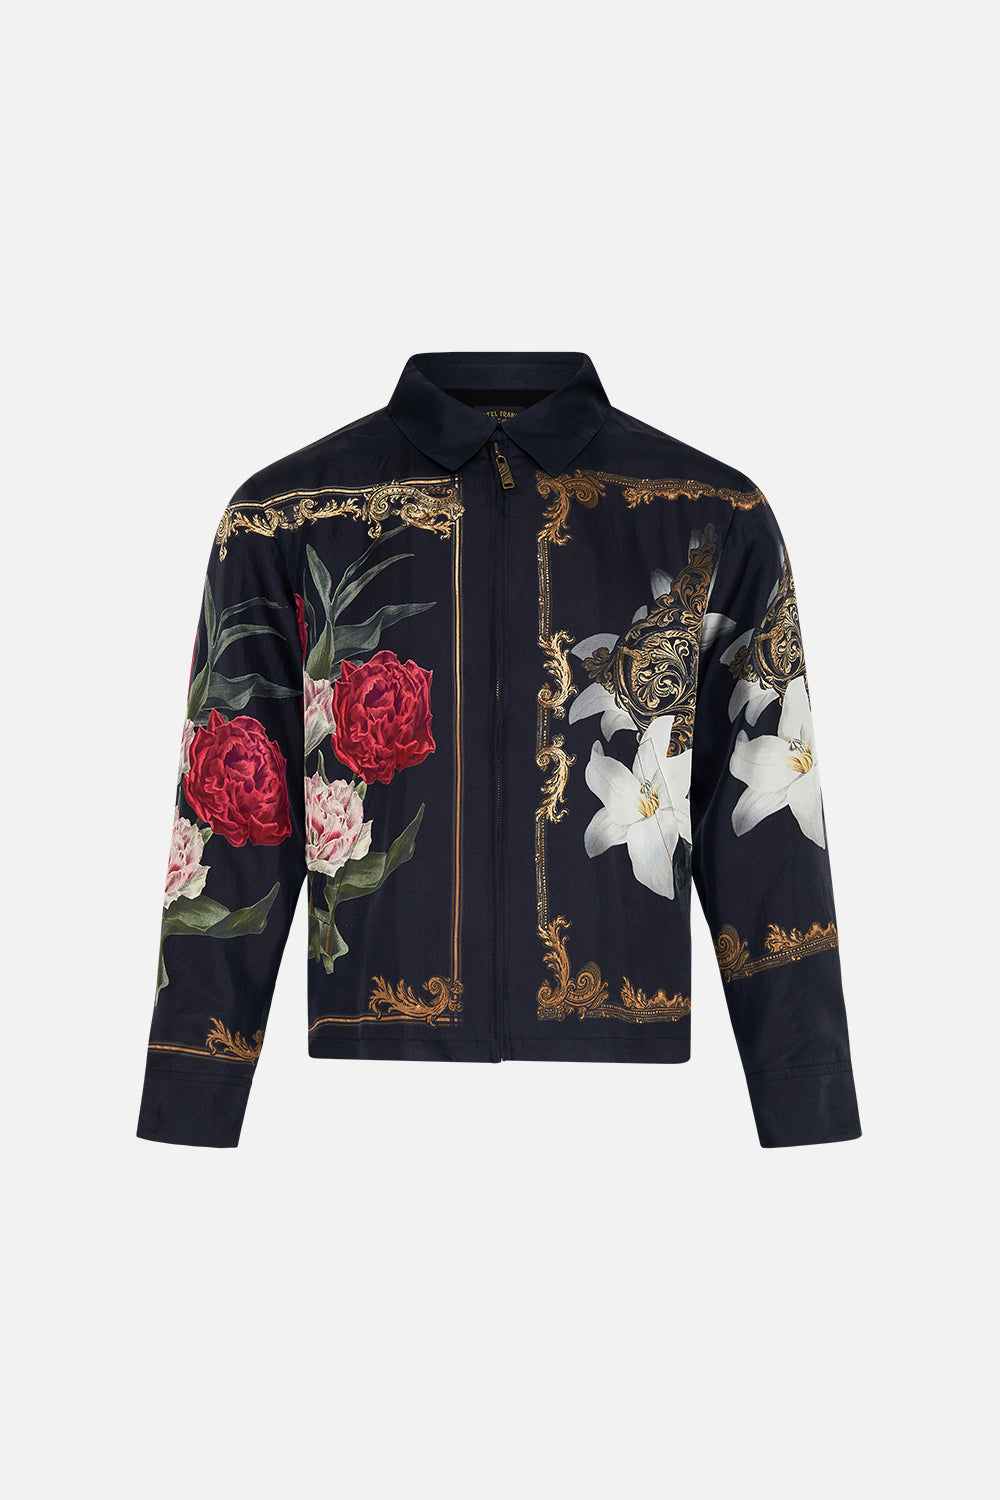 CAMILLA floral cropped zip through jacket in Magic in the Manuscripts